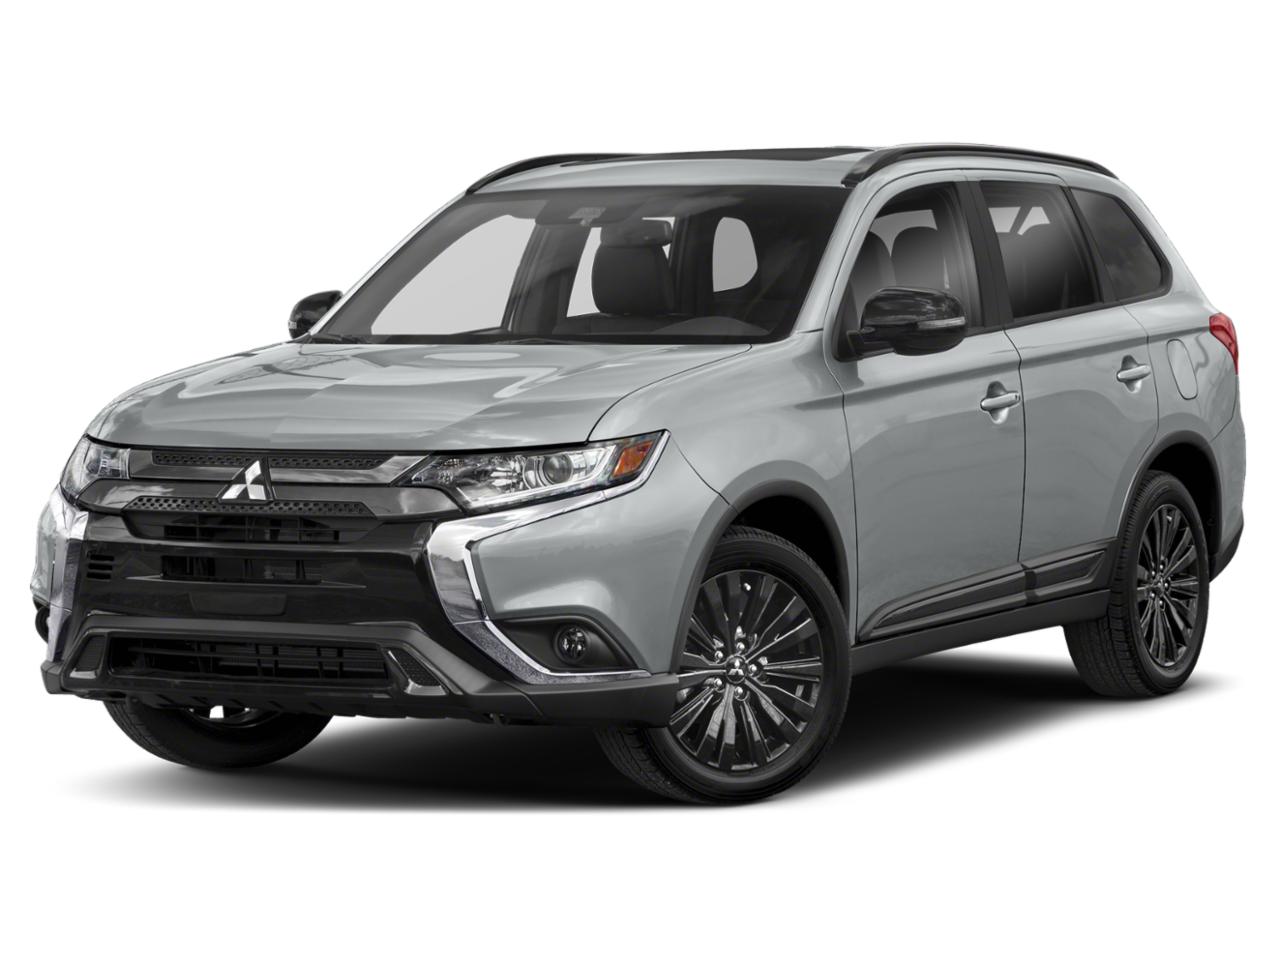 2020 Mitsubishi Outlander Vehicle Photo in Forest Park, IL 60130